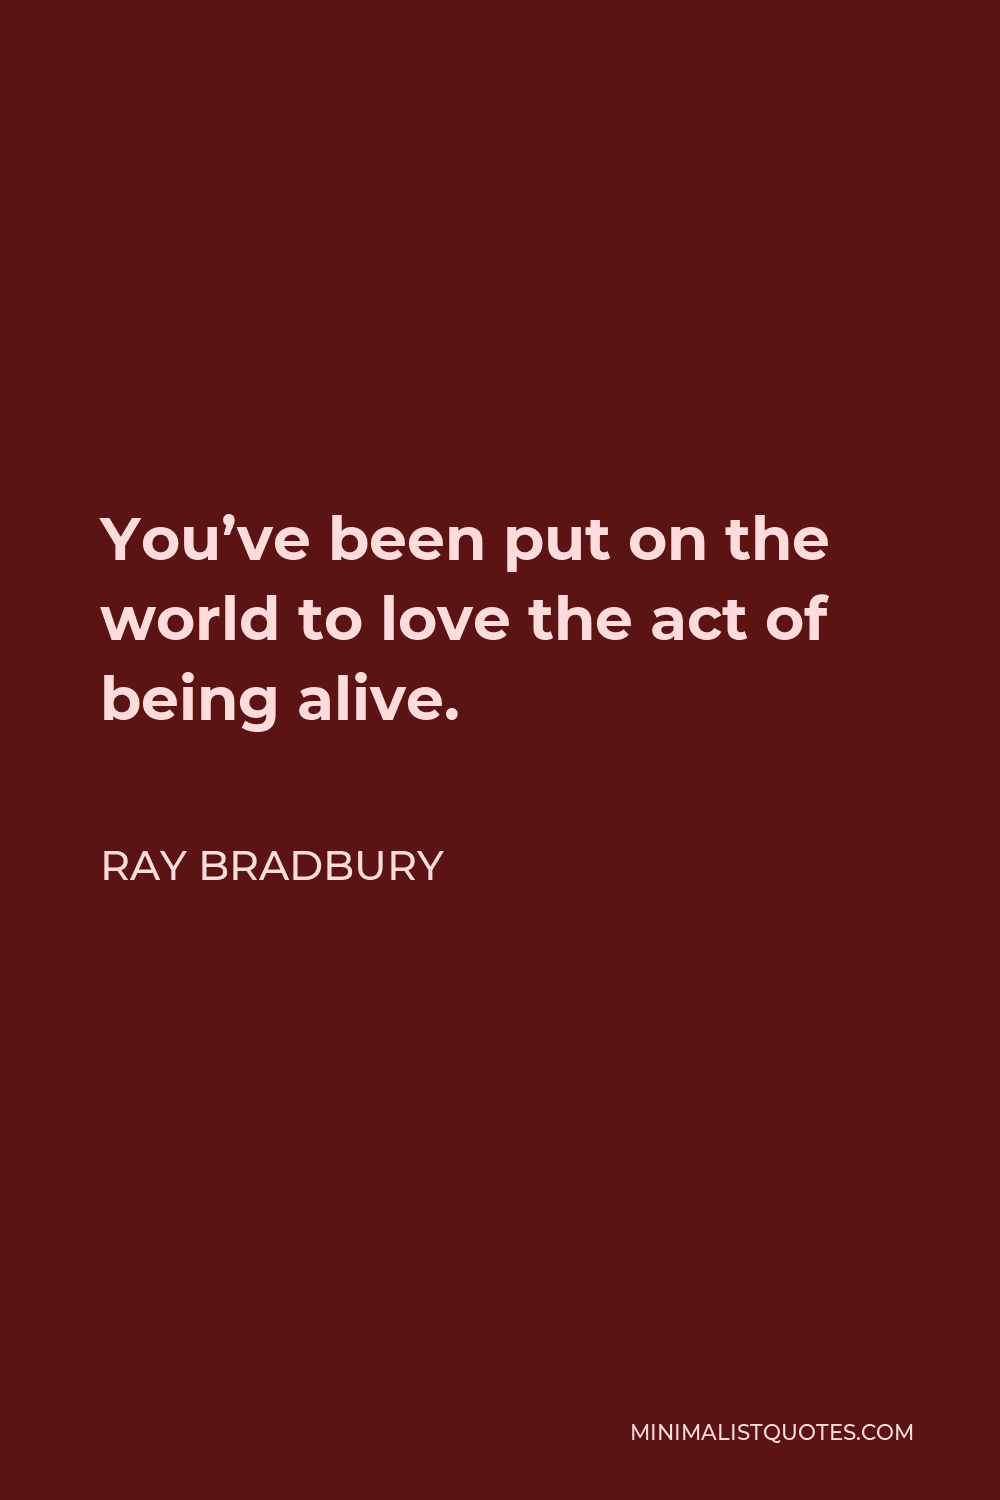 Ray Bradbury Quote - You’ve been put on the world to love the act of being alive.